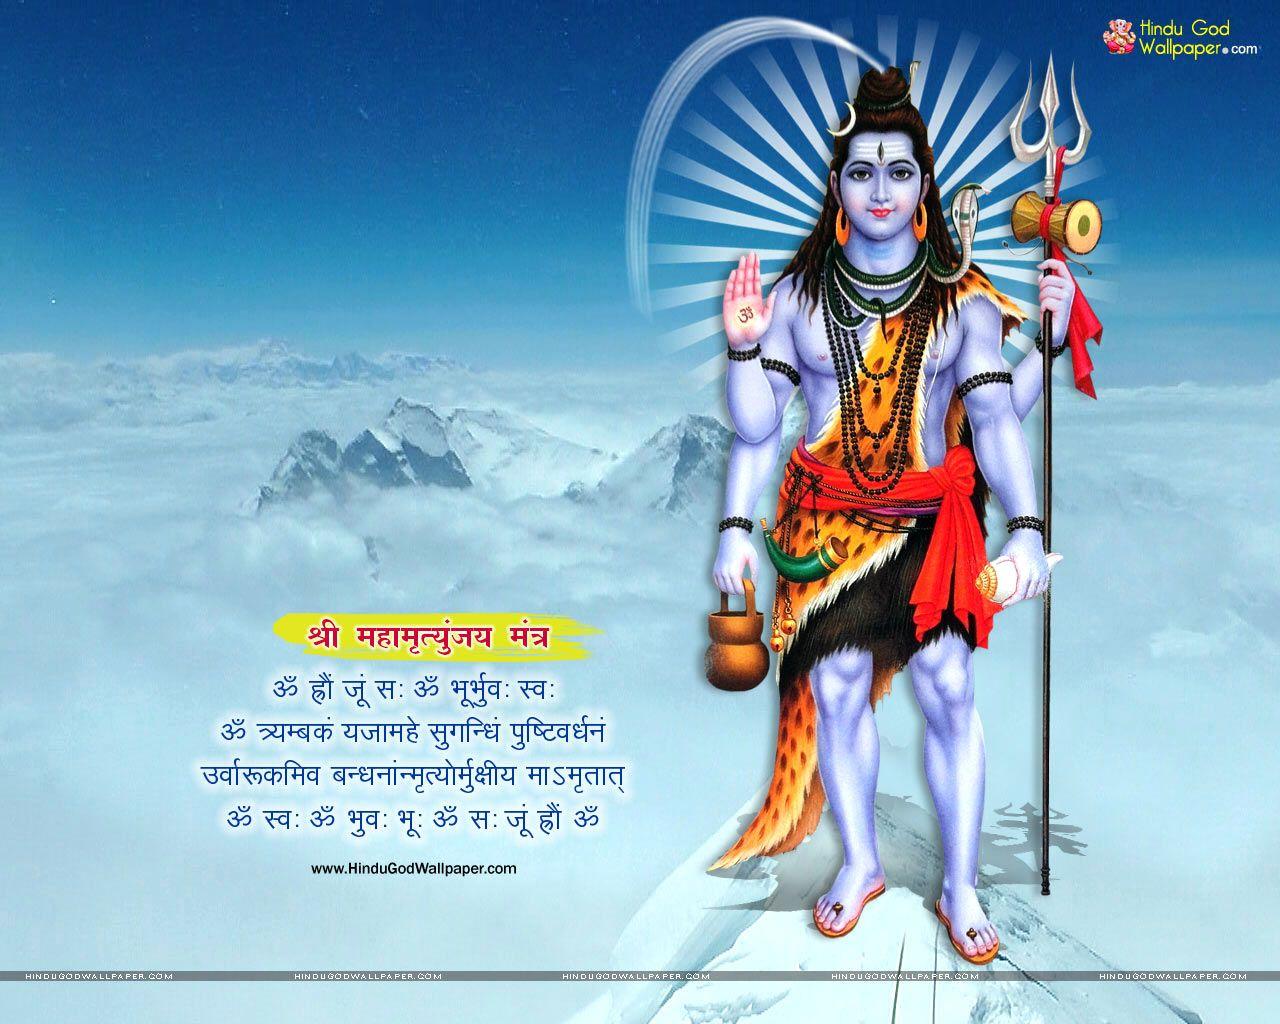 Happy Mahashivratri Images and HD Wallpapers For Free Download   Mahashivratri images Mahashivratri images hd Hd images